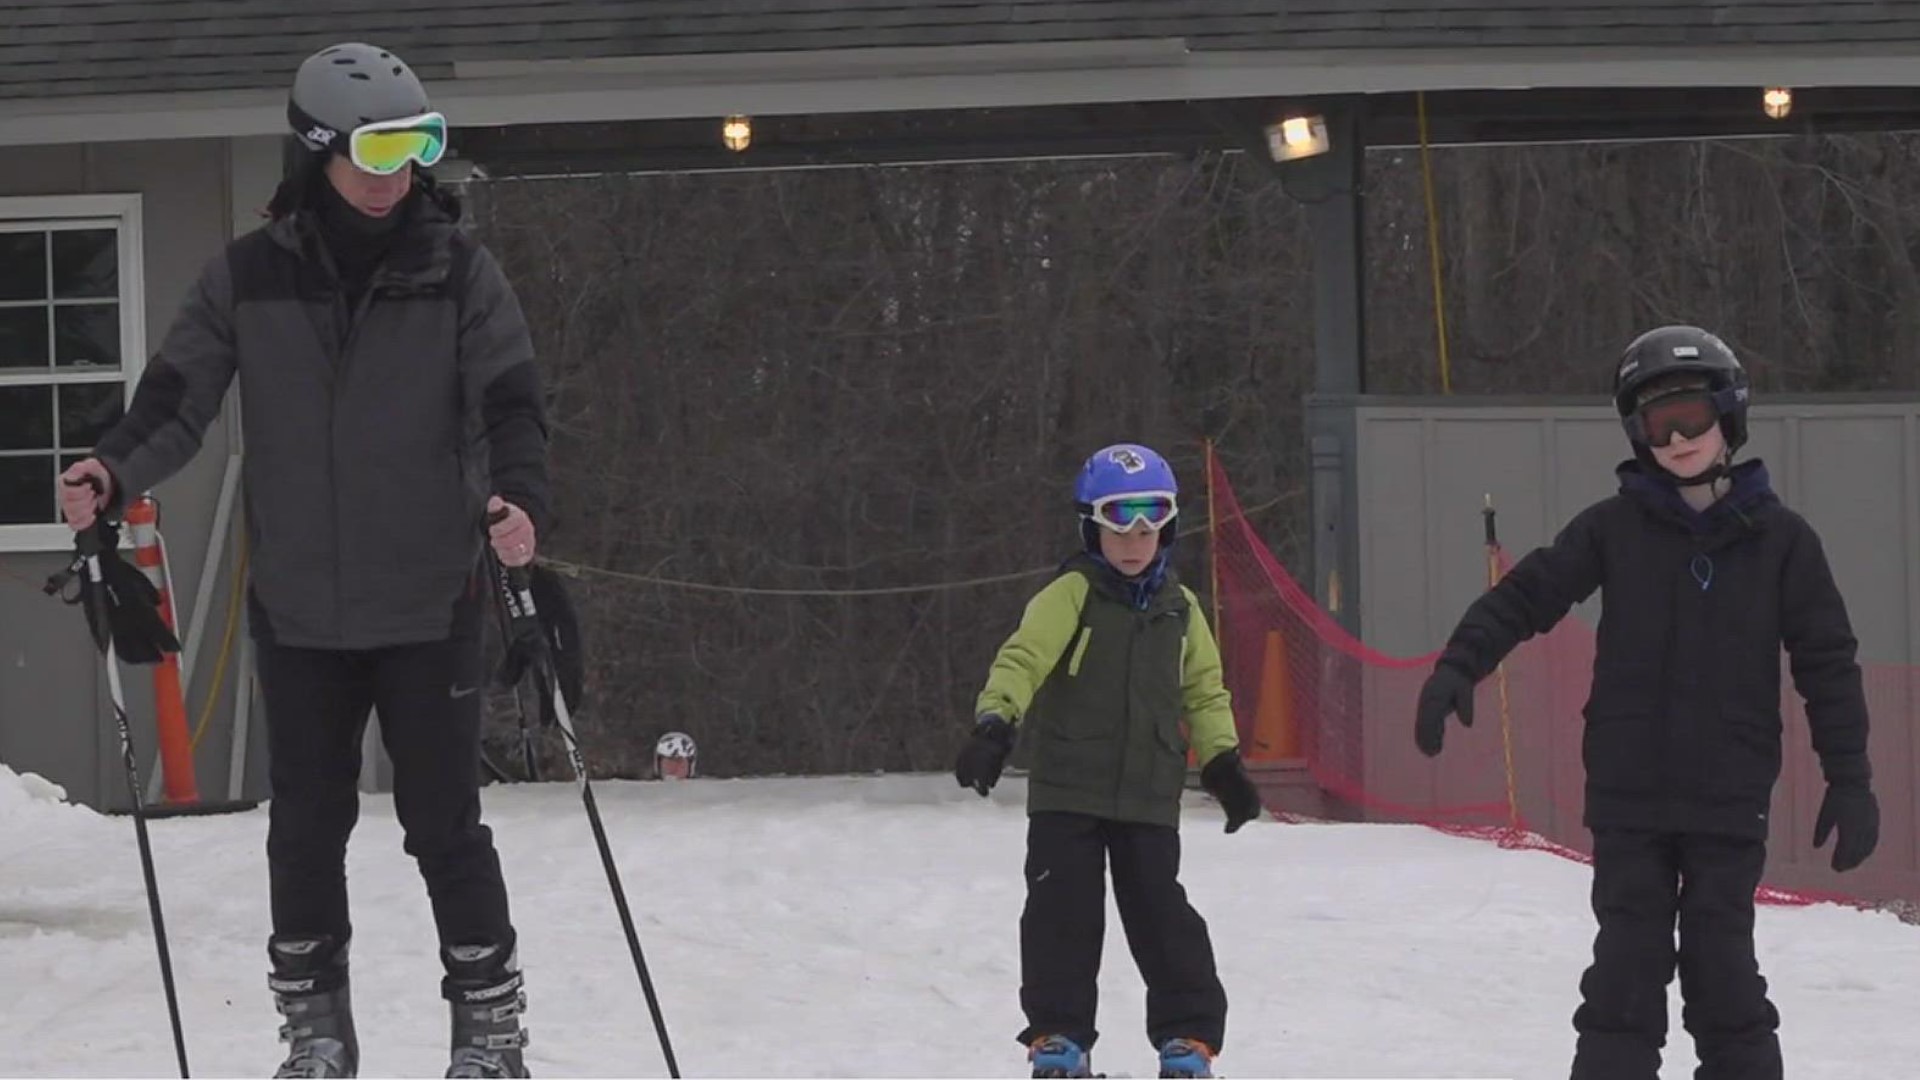 Learning to ski or snowboard can provide family memories and a lifetime of fun.